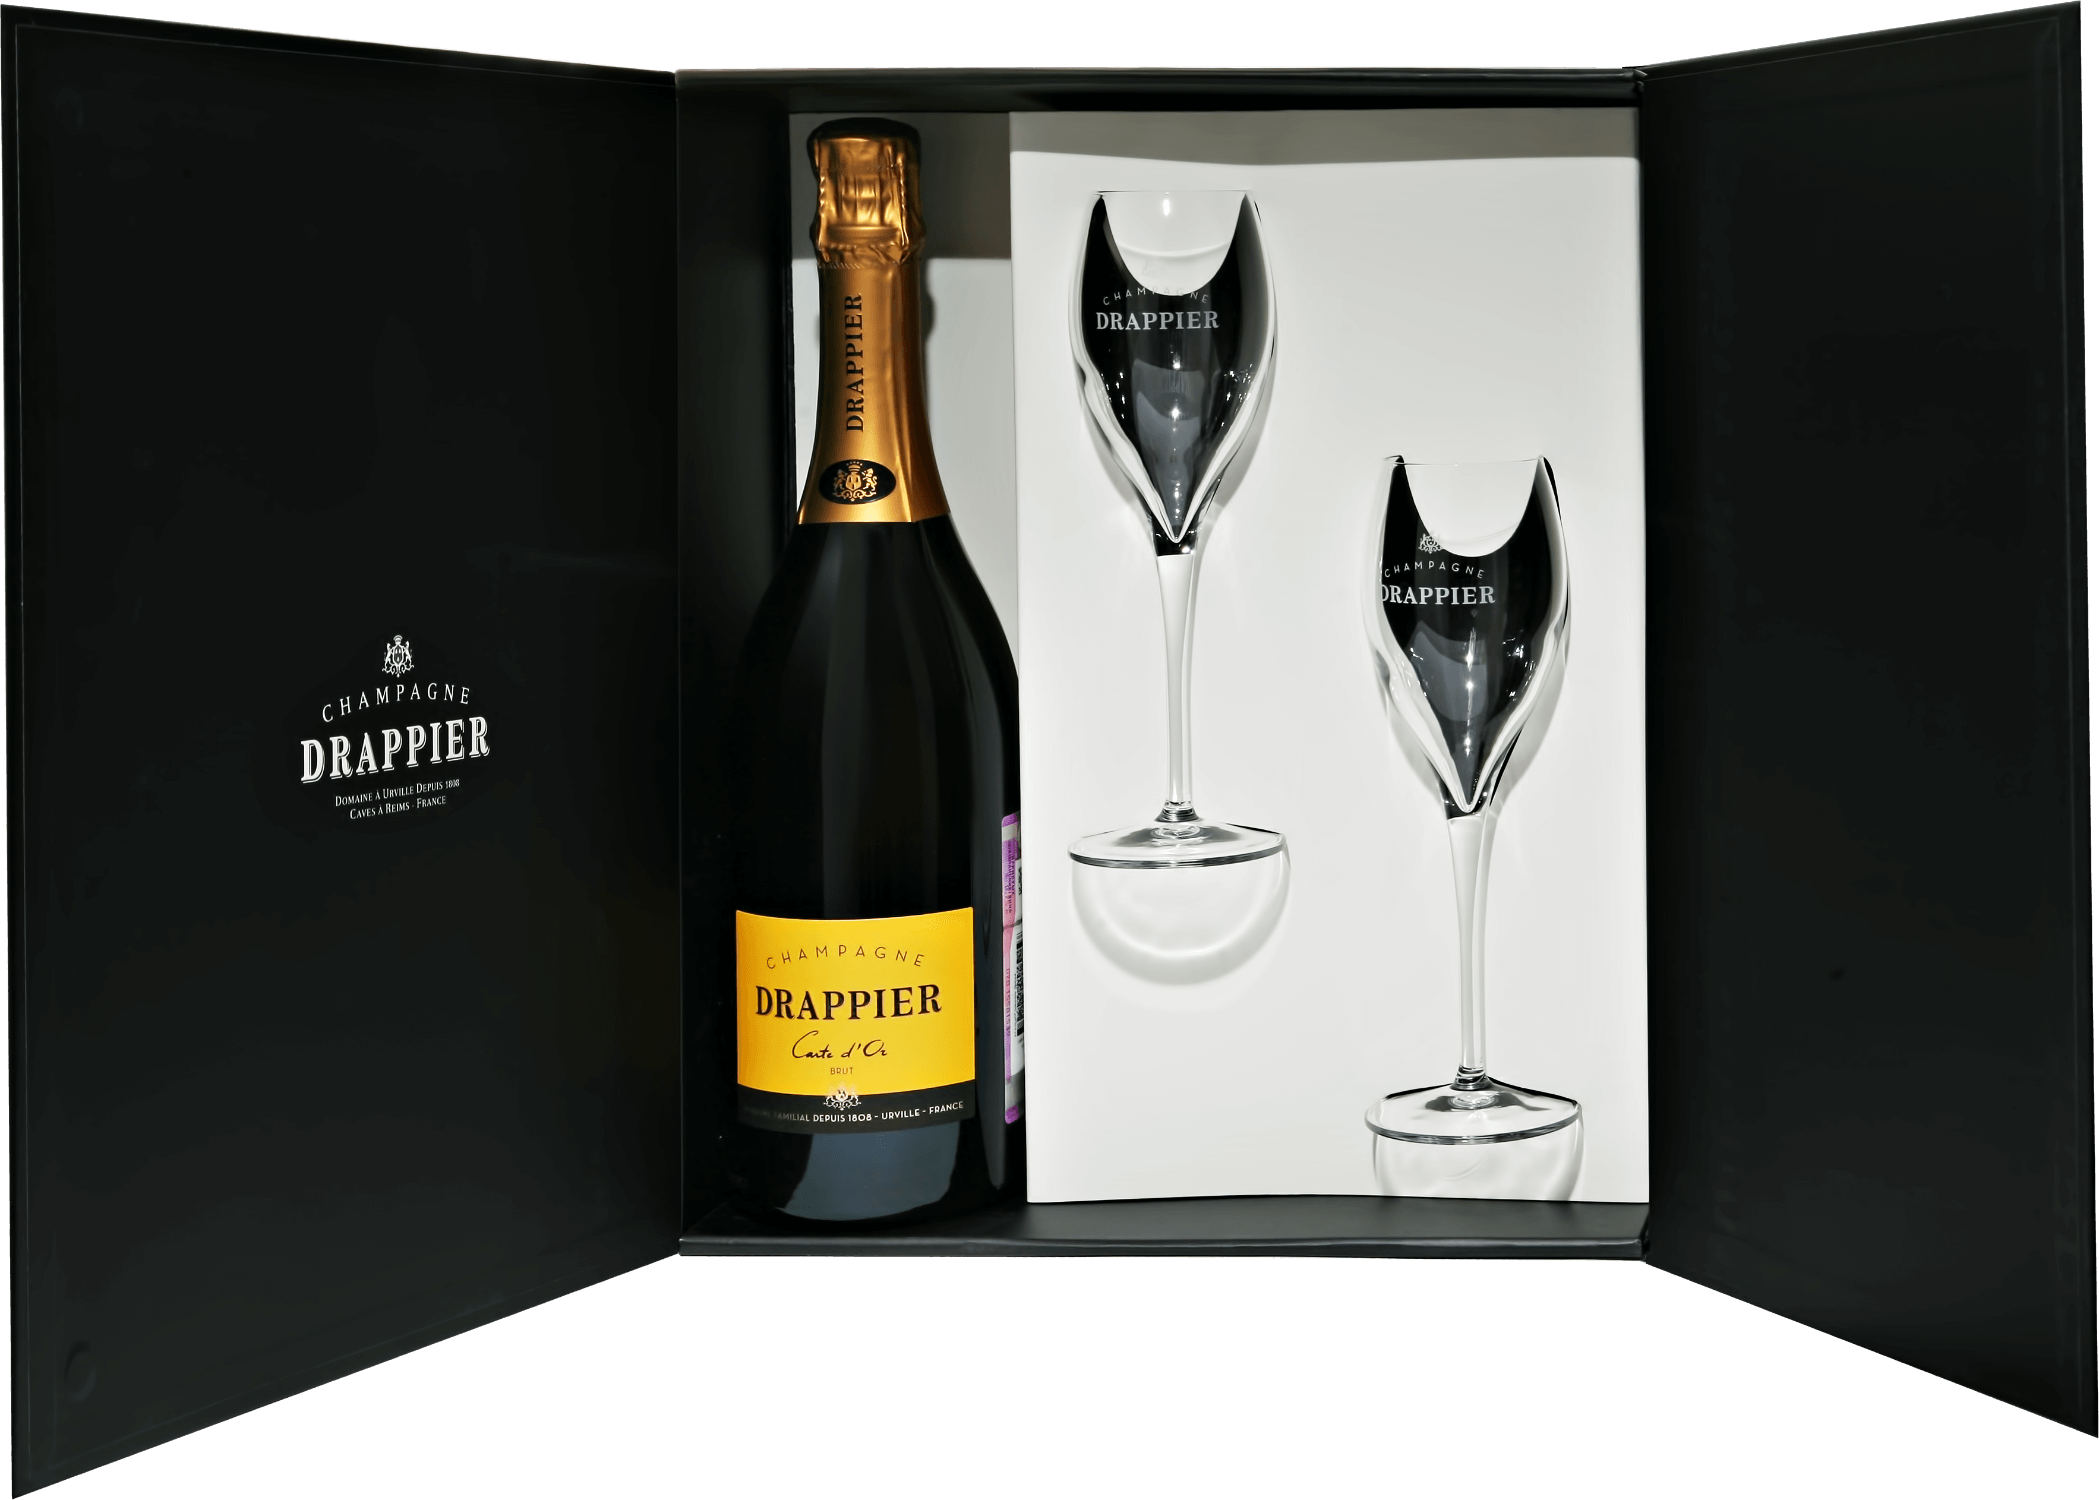 цена Drappier Carte d’Or Brut Champagne AOP in gift box with two glasses